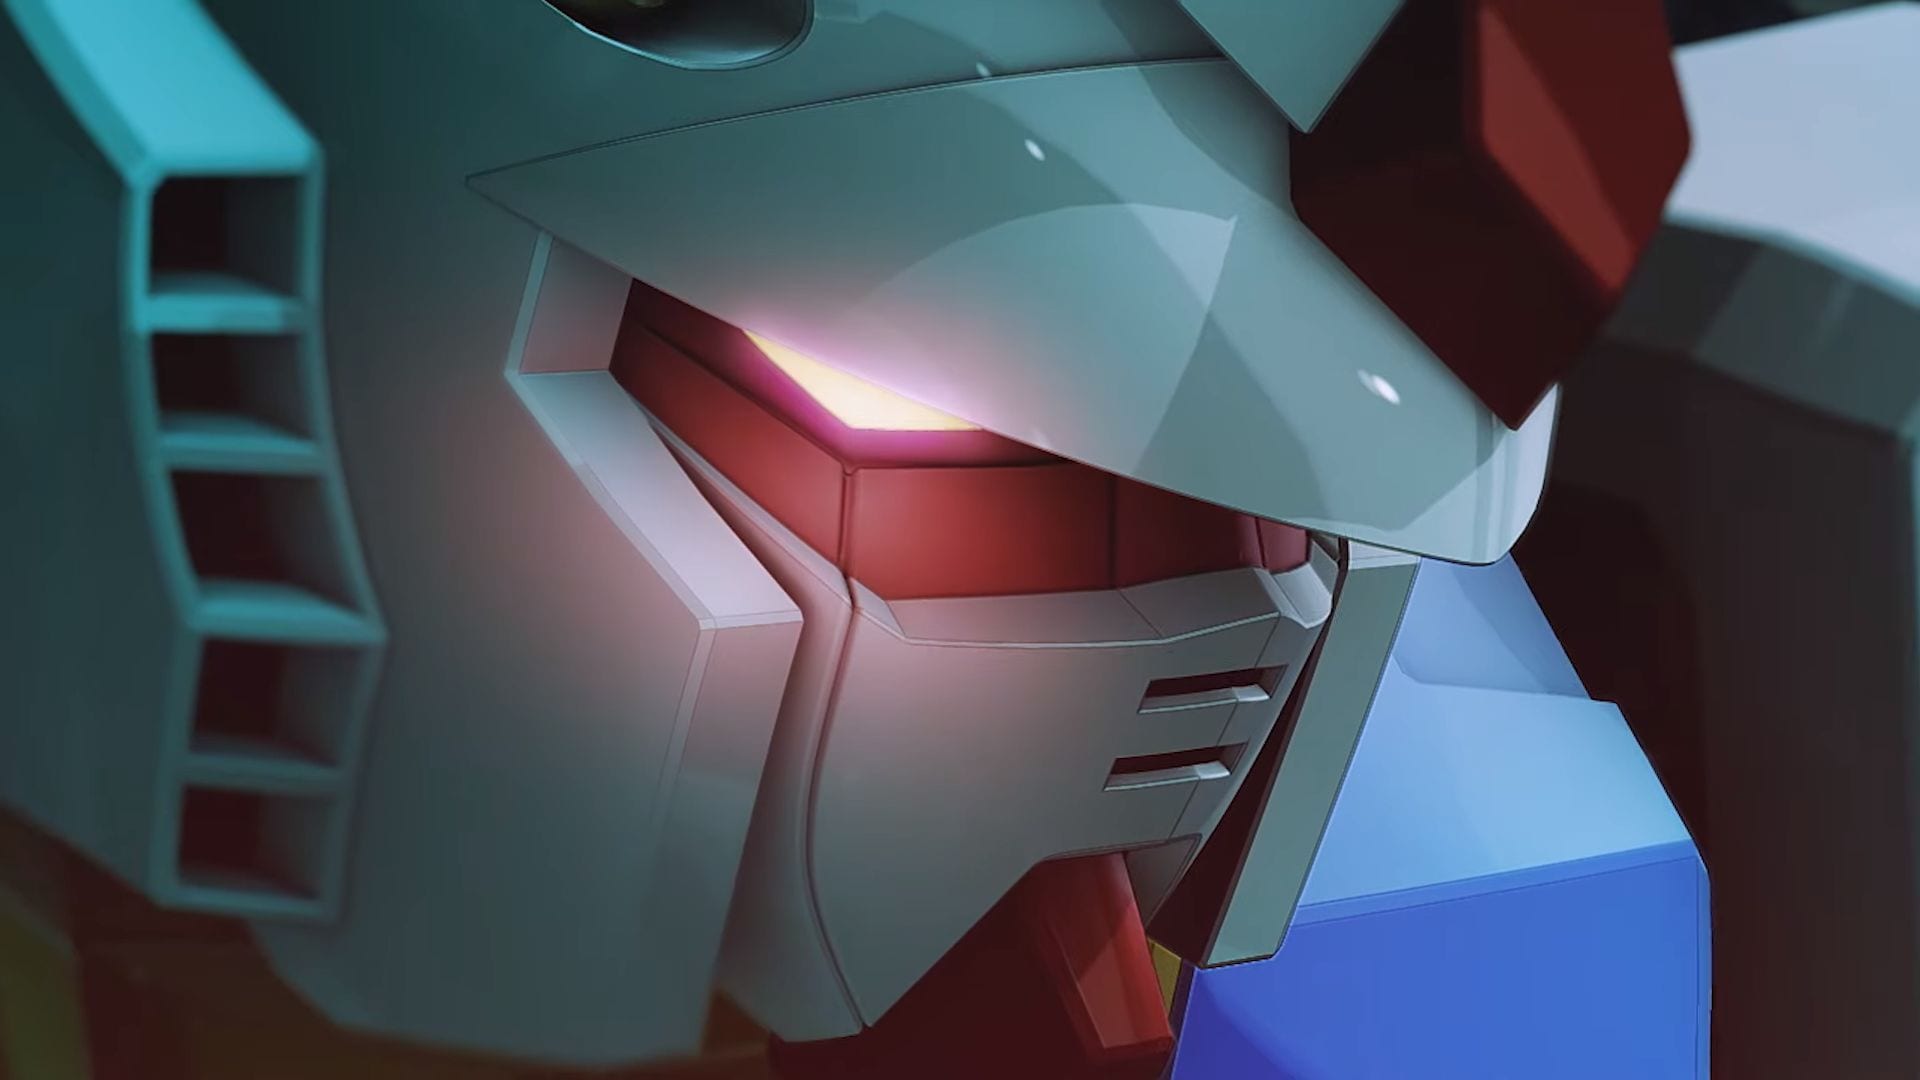 Mobile Suit Gundam Extreme Vs Maxi Boost On For Ps4 Gets First Gameplay Trailer And Details